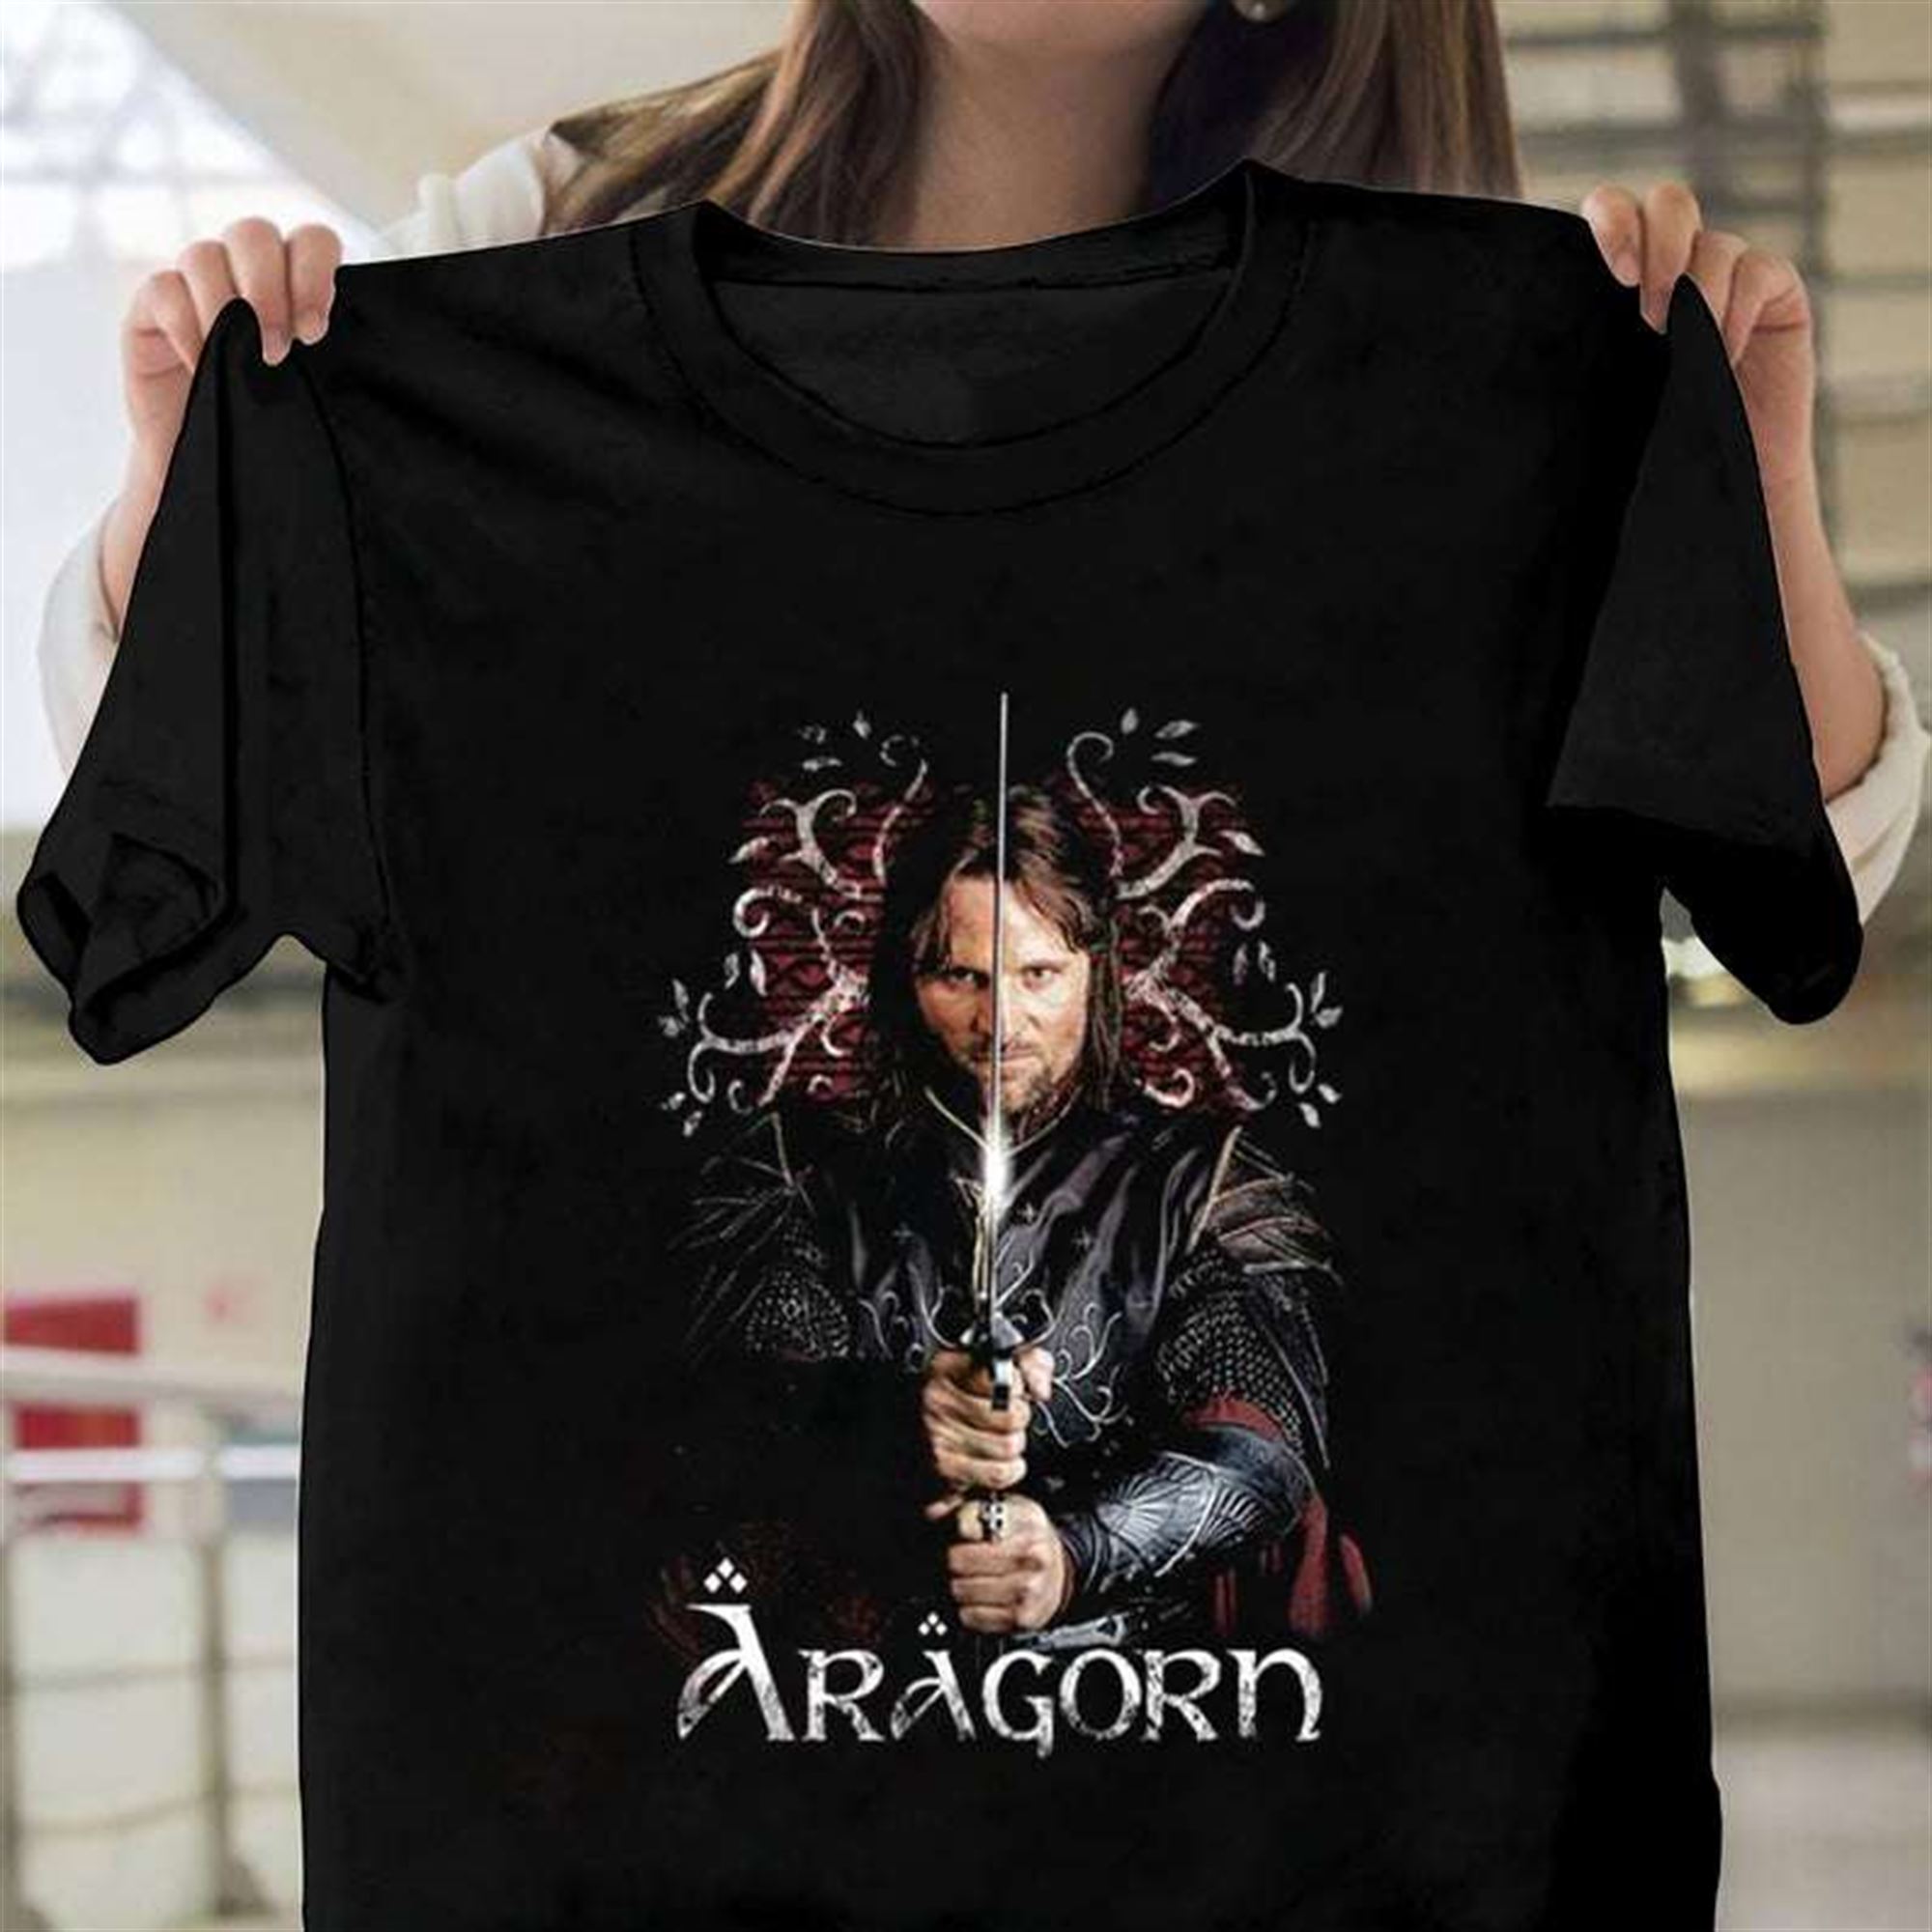 The Lord Of The Rings Aragorn Ranger Of The North T-shirt Full Size Up To 5xl